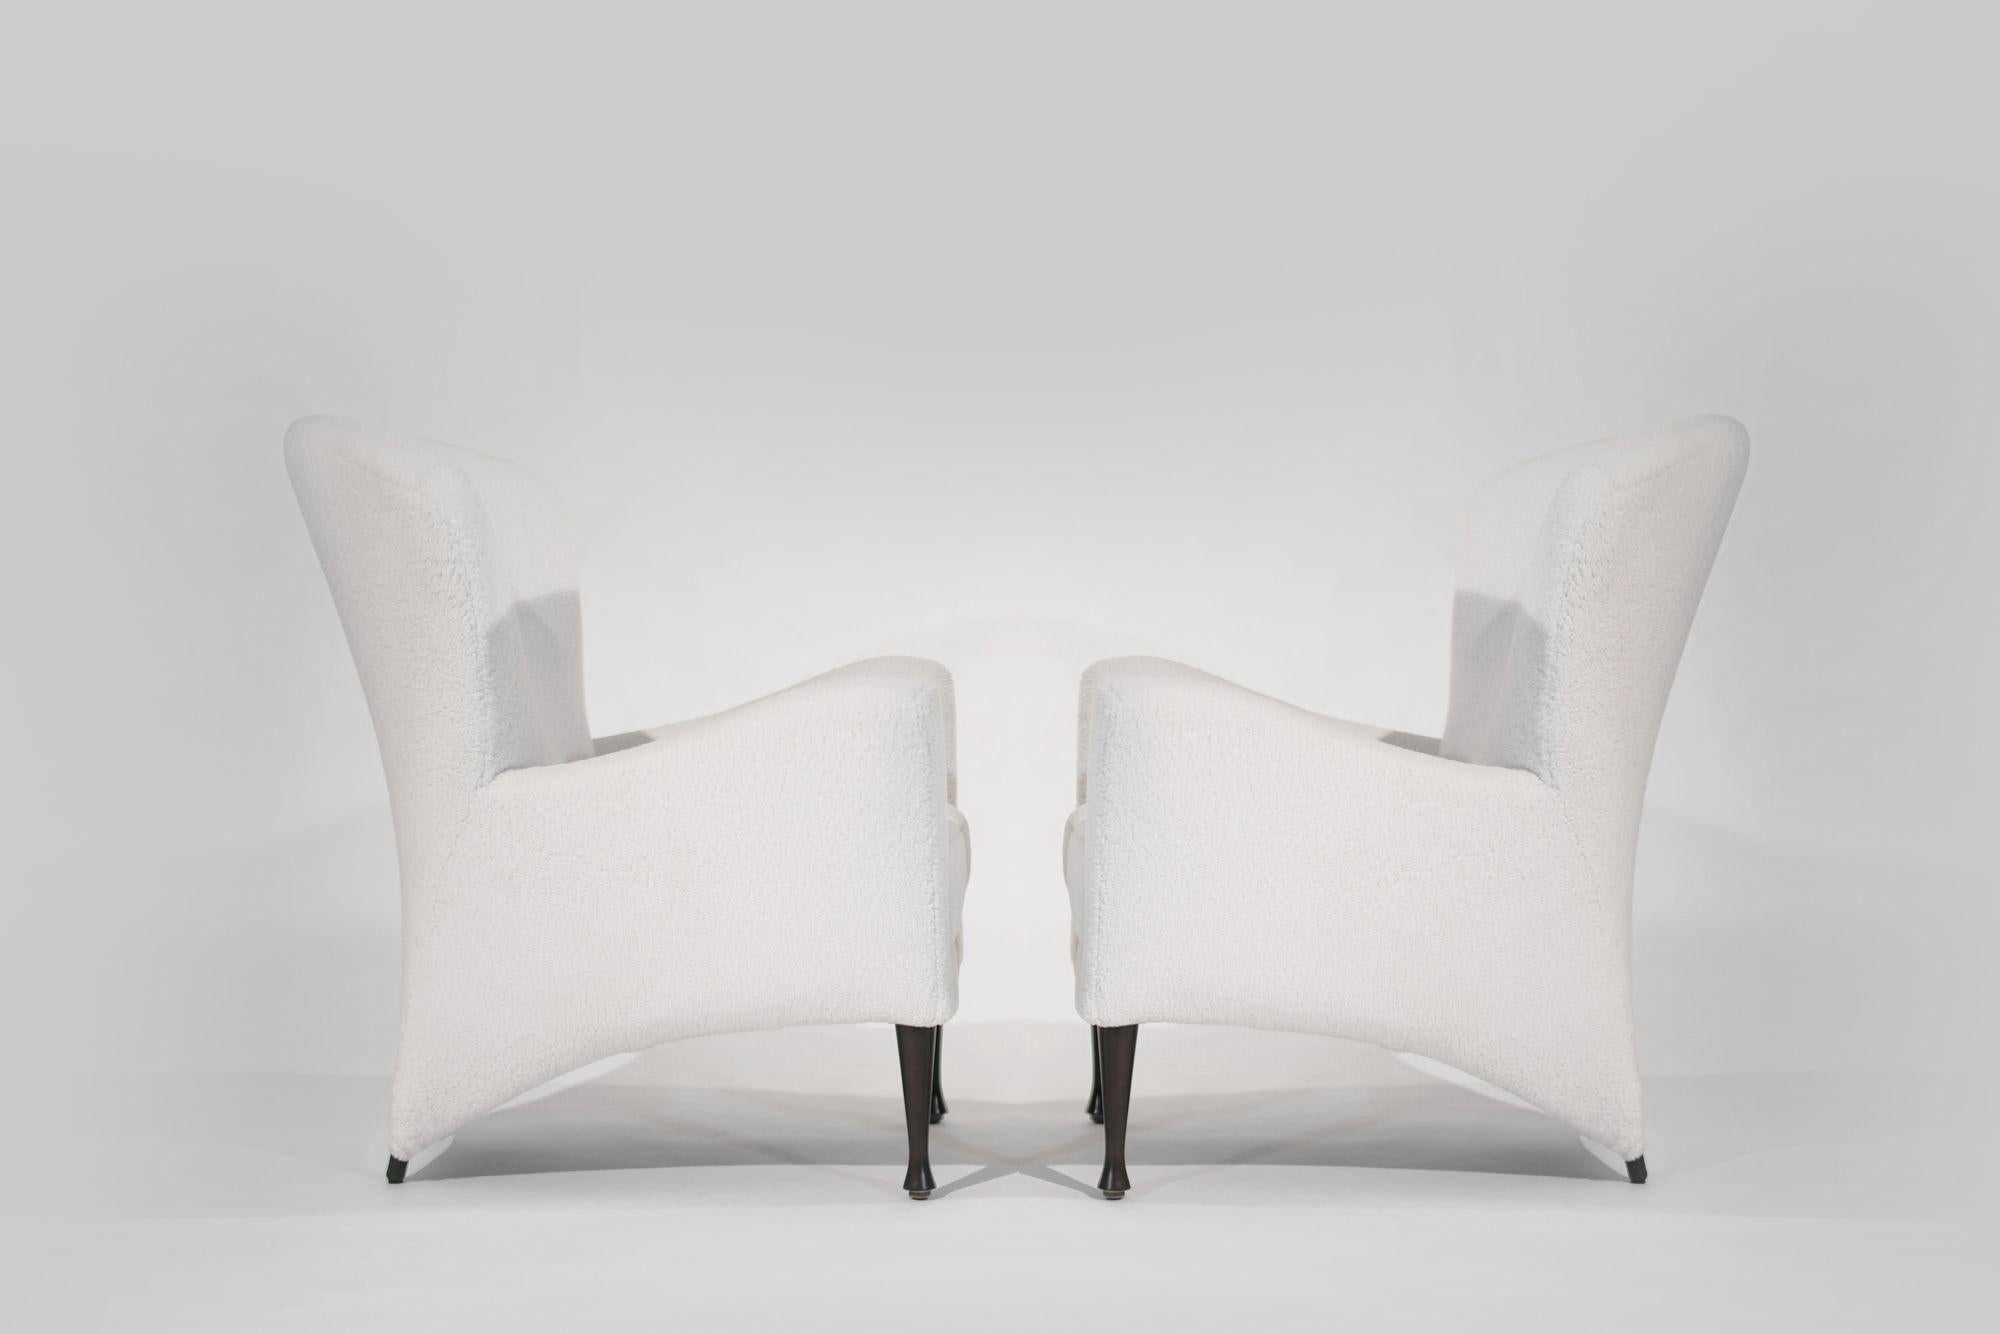 Restored to perfection, this set of Castor Lounge Chairs offers timeless style and comfort. Originally designed by Gijs Papavoine for Montis, these chairs feature a sleek metal frame and have been reupholstered in luxurious wool bouclé. A perfect